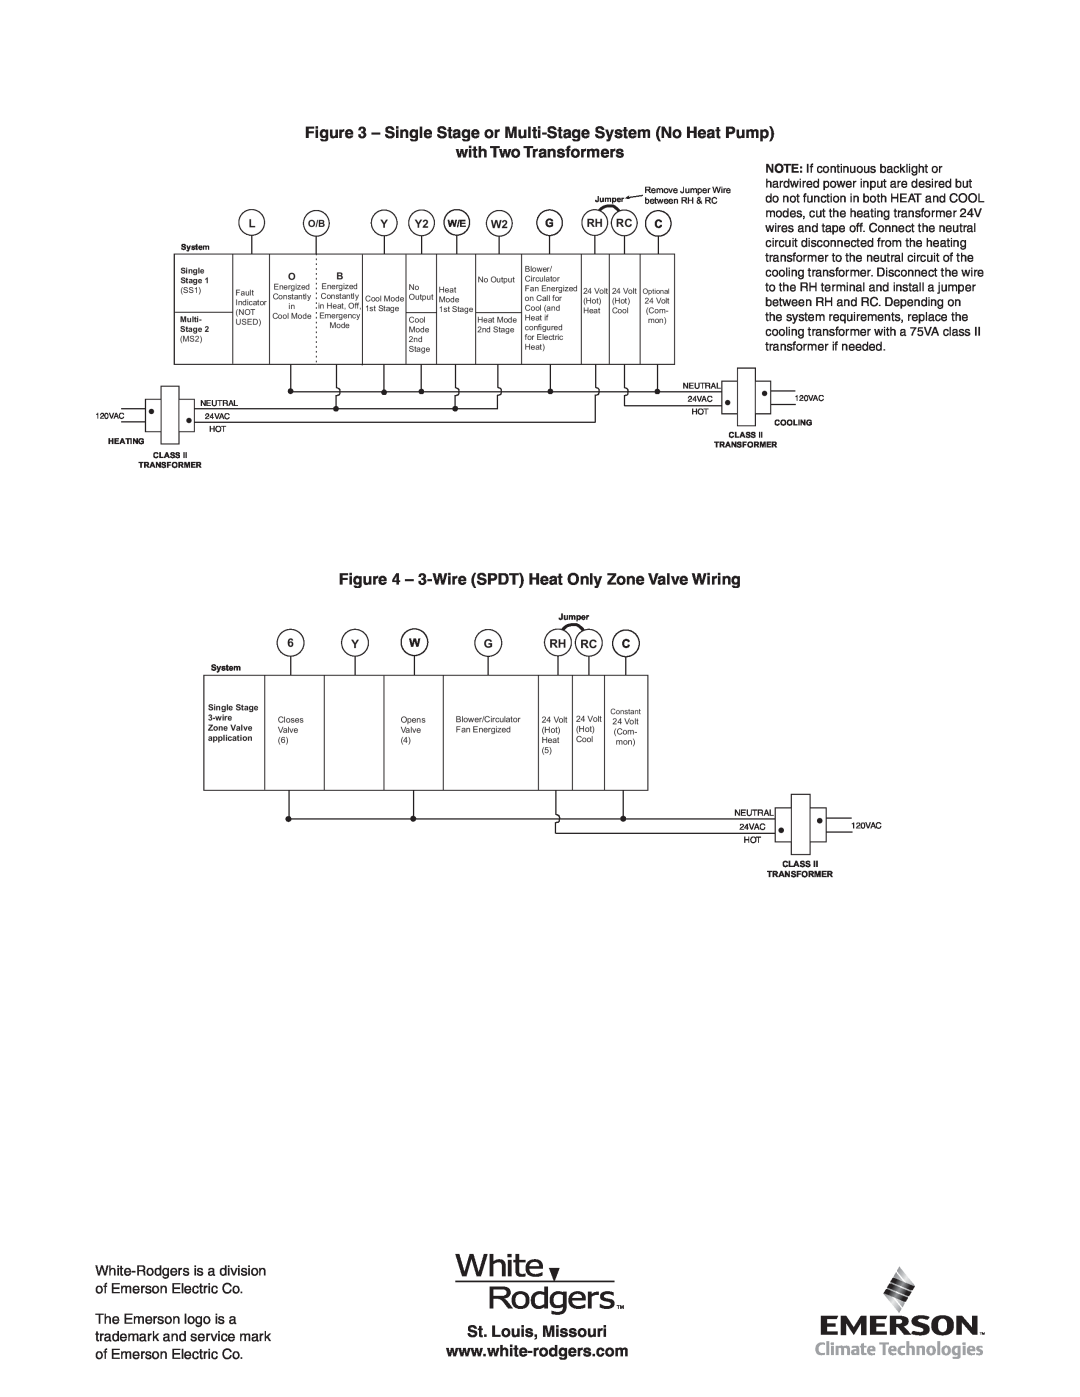 White Rodgers 1F85-0422 manual Single Stage or Multi-Stage System No Heat Pump, with Two Transformers, St. Louis, Missouri 